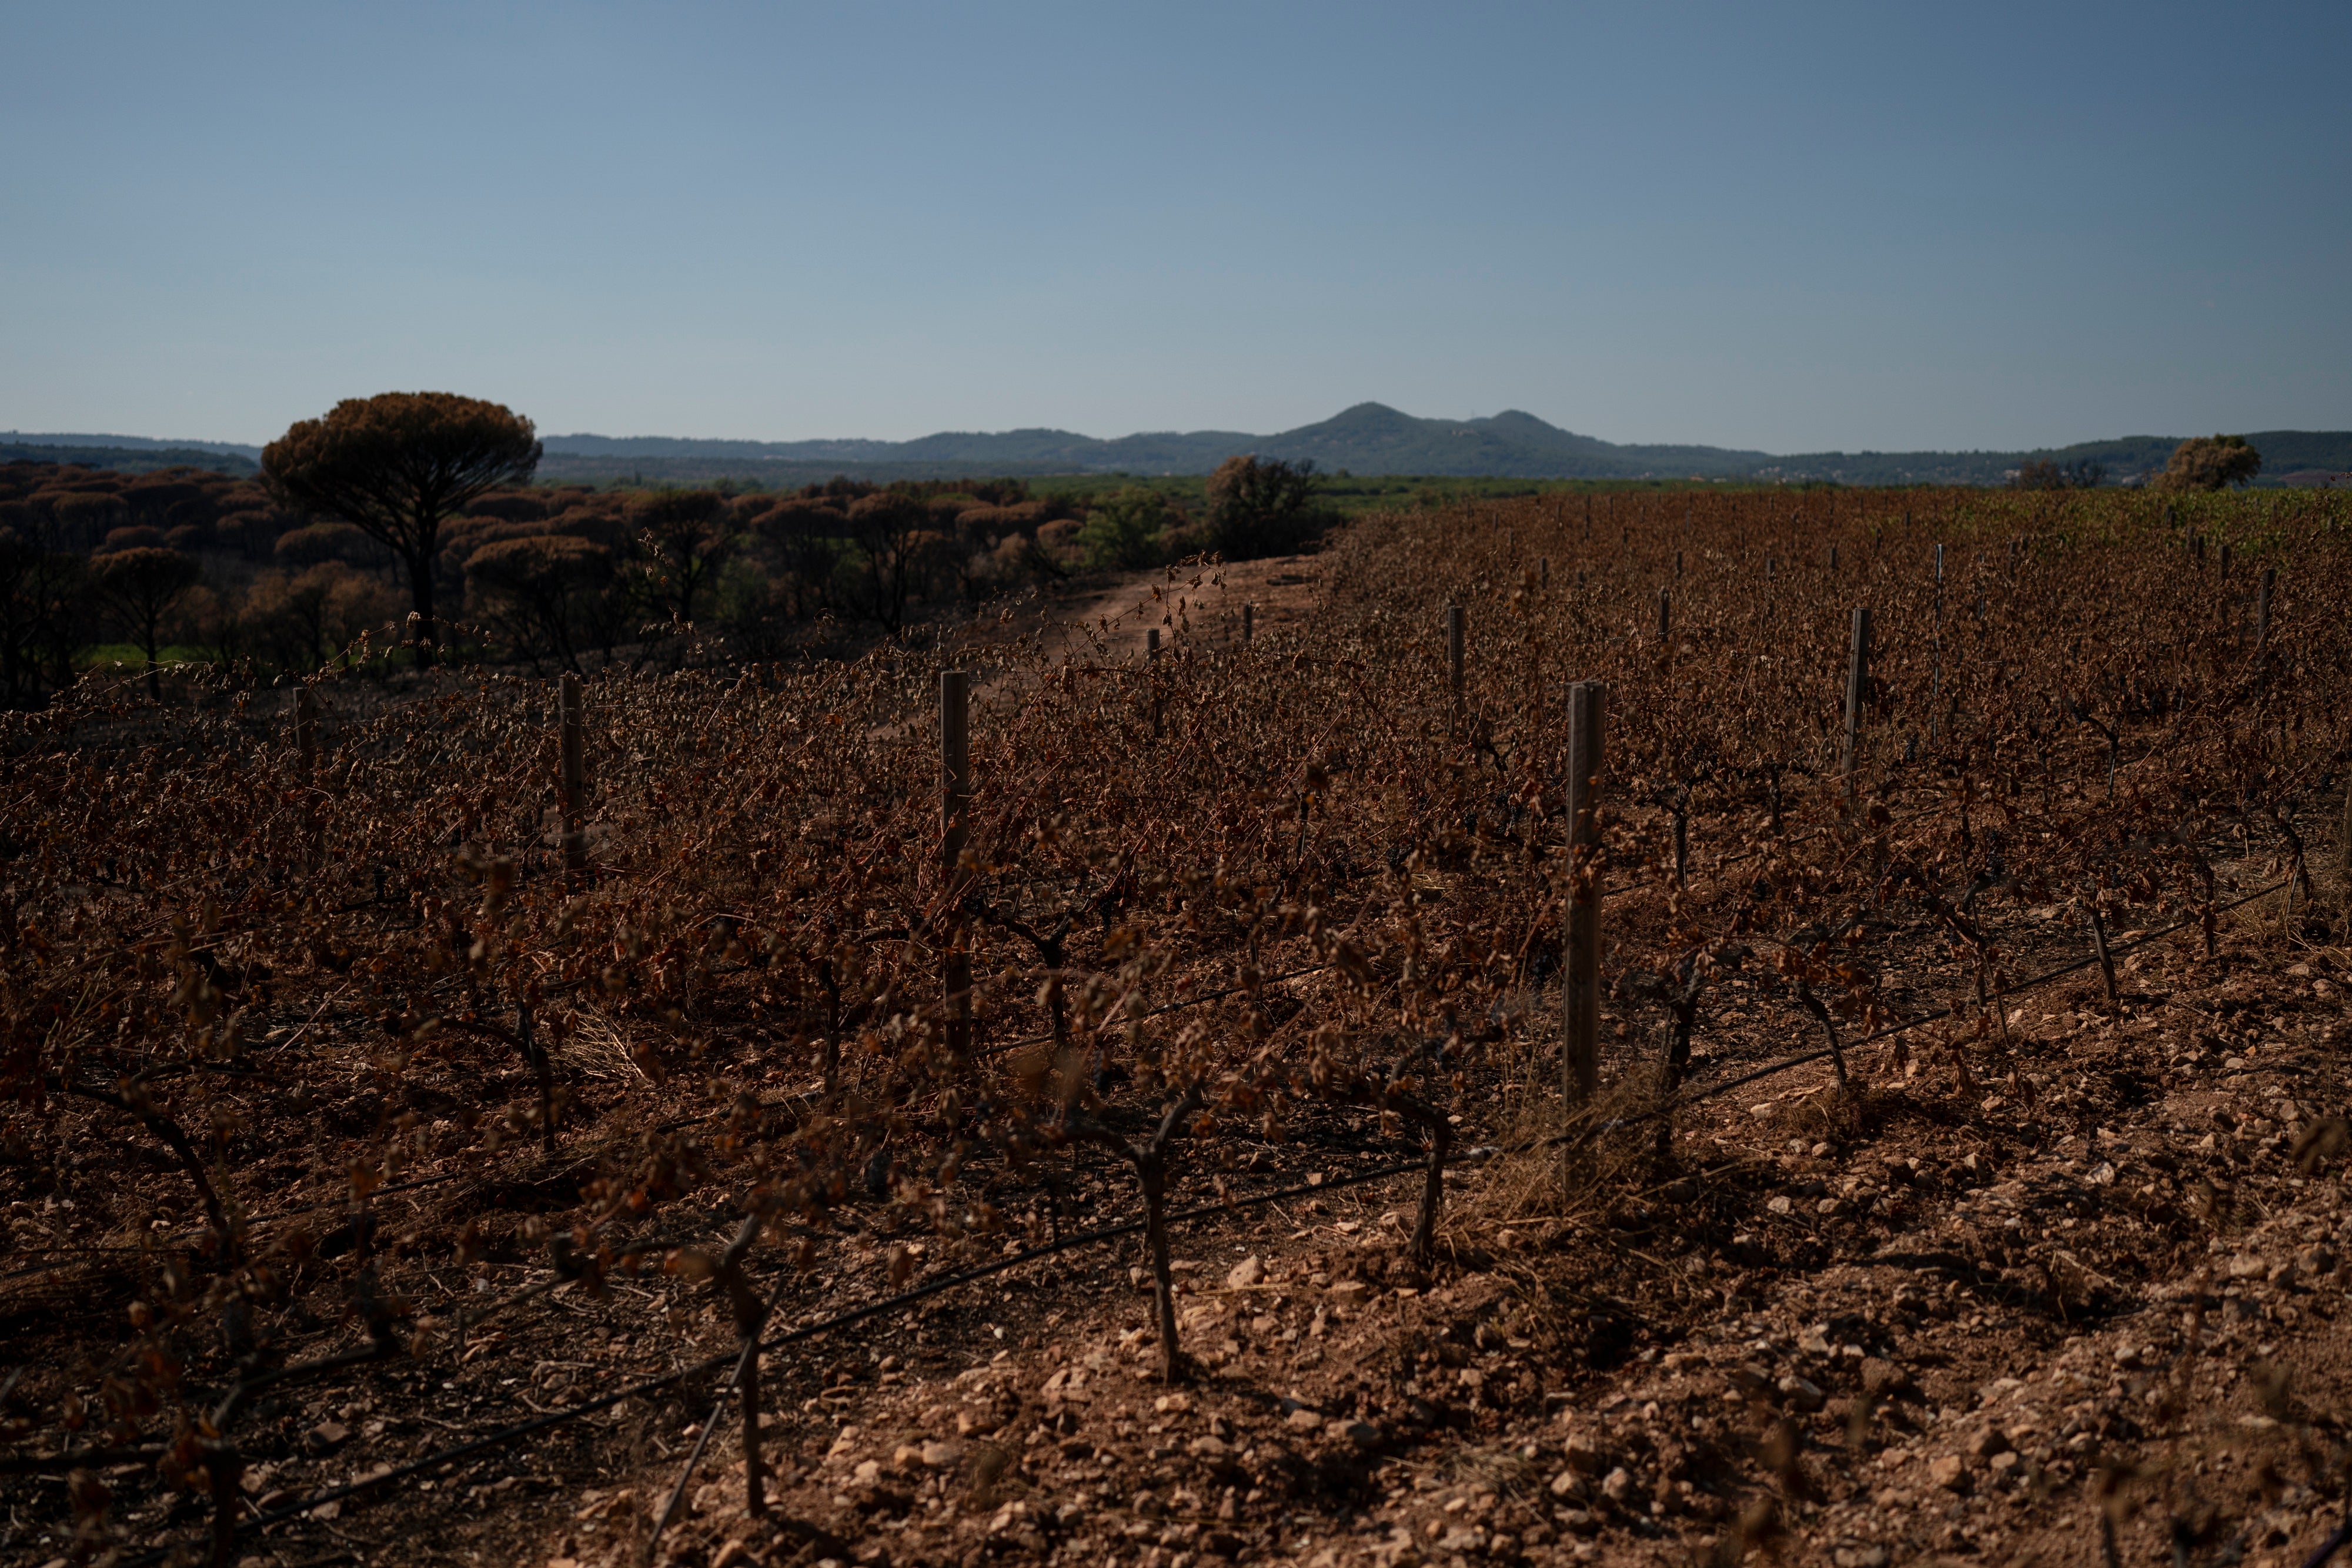 Vineyards charred by a wildfire are pictured at the Chateau des Bertrands vineyard in Cannet-des-Maures, southern France